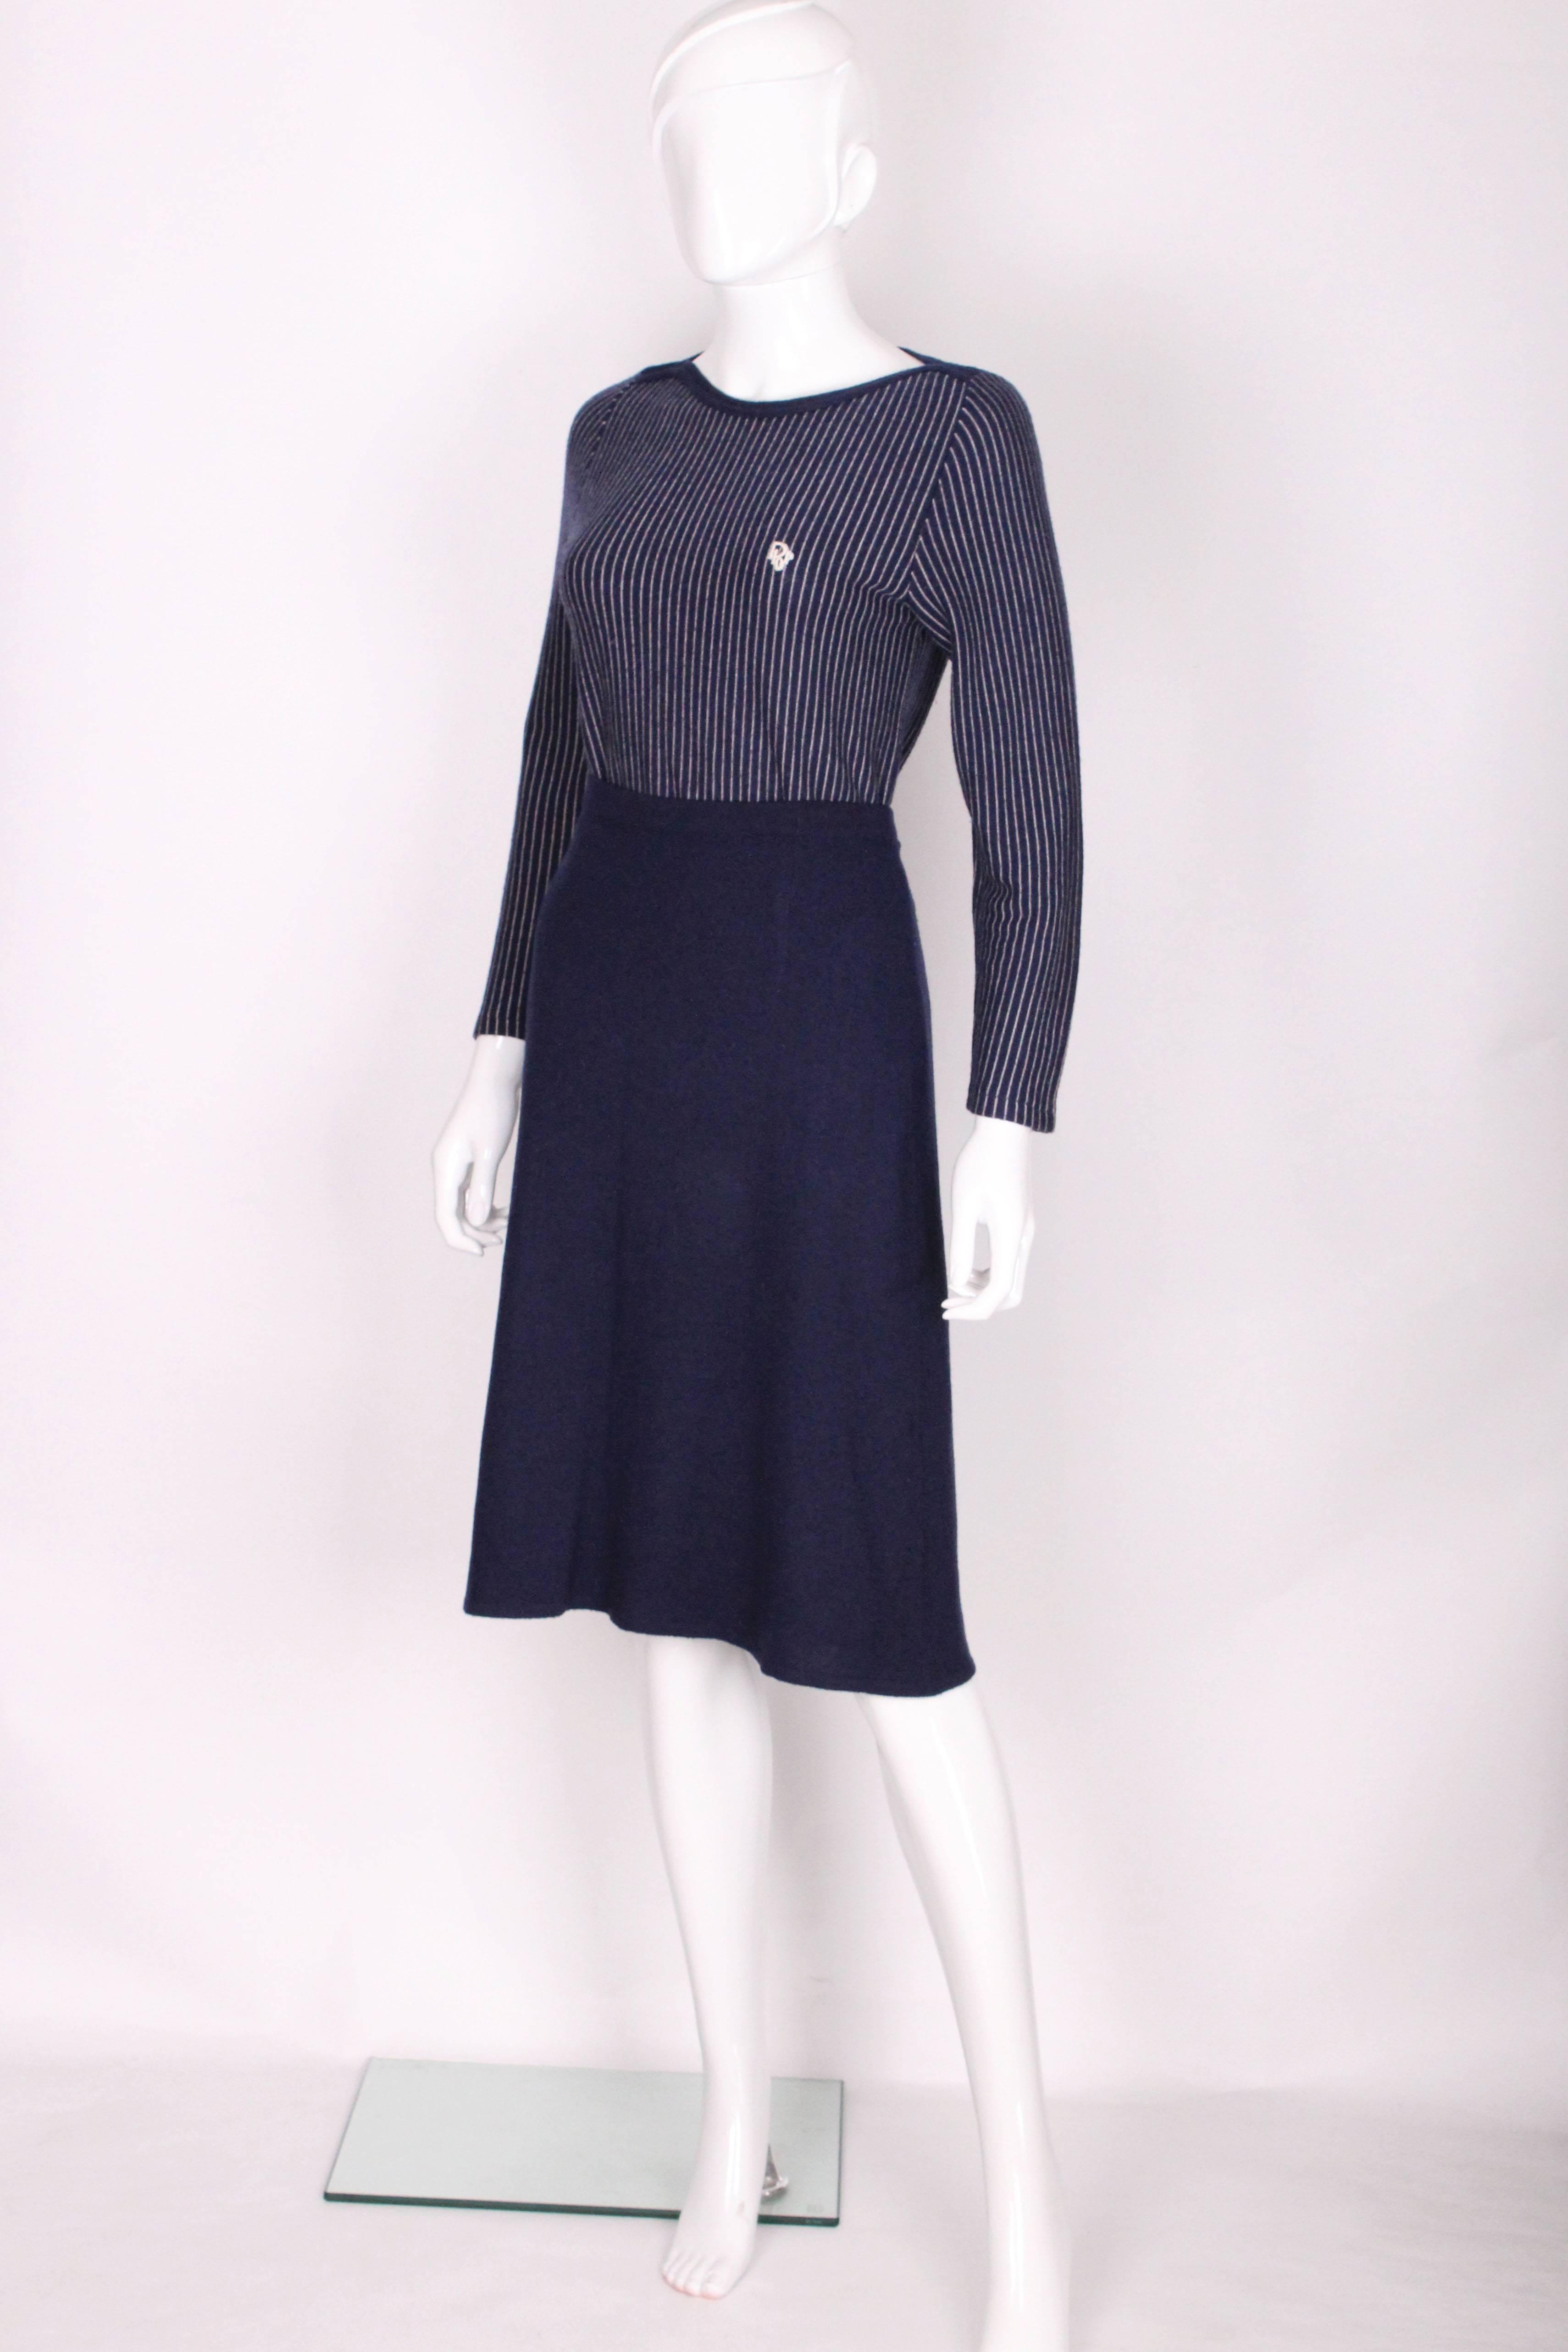 Black 1970's Christian Dior London Knitted  2 Piece